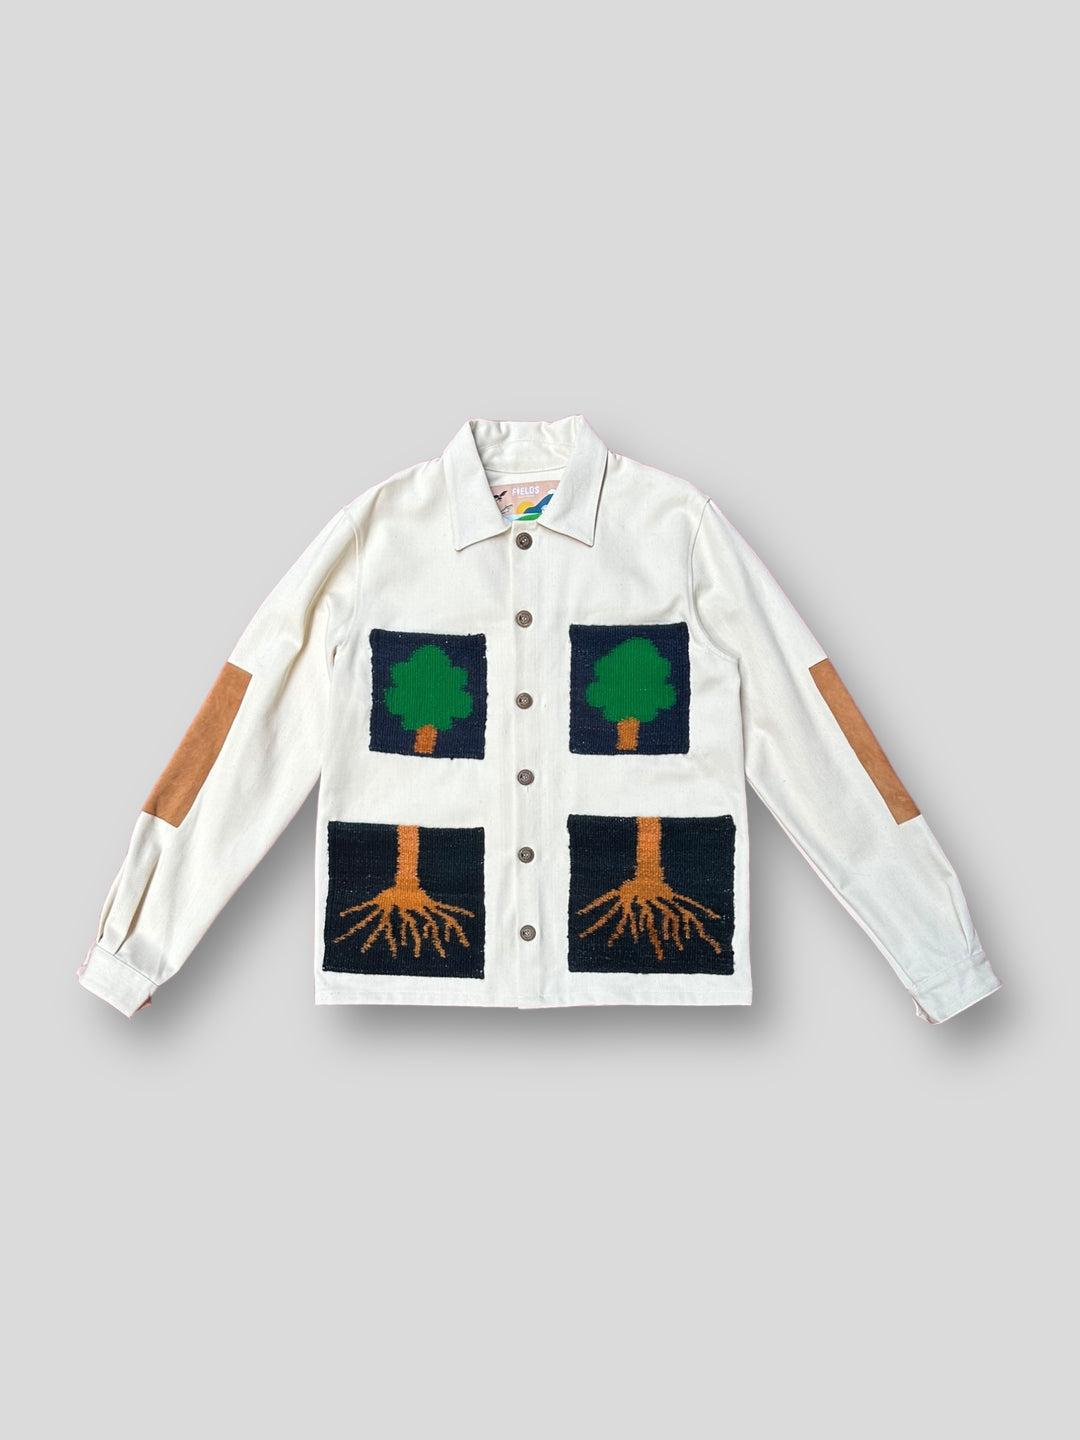 The Roots Tapestry Jacket